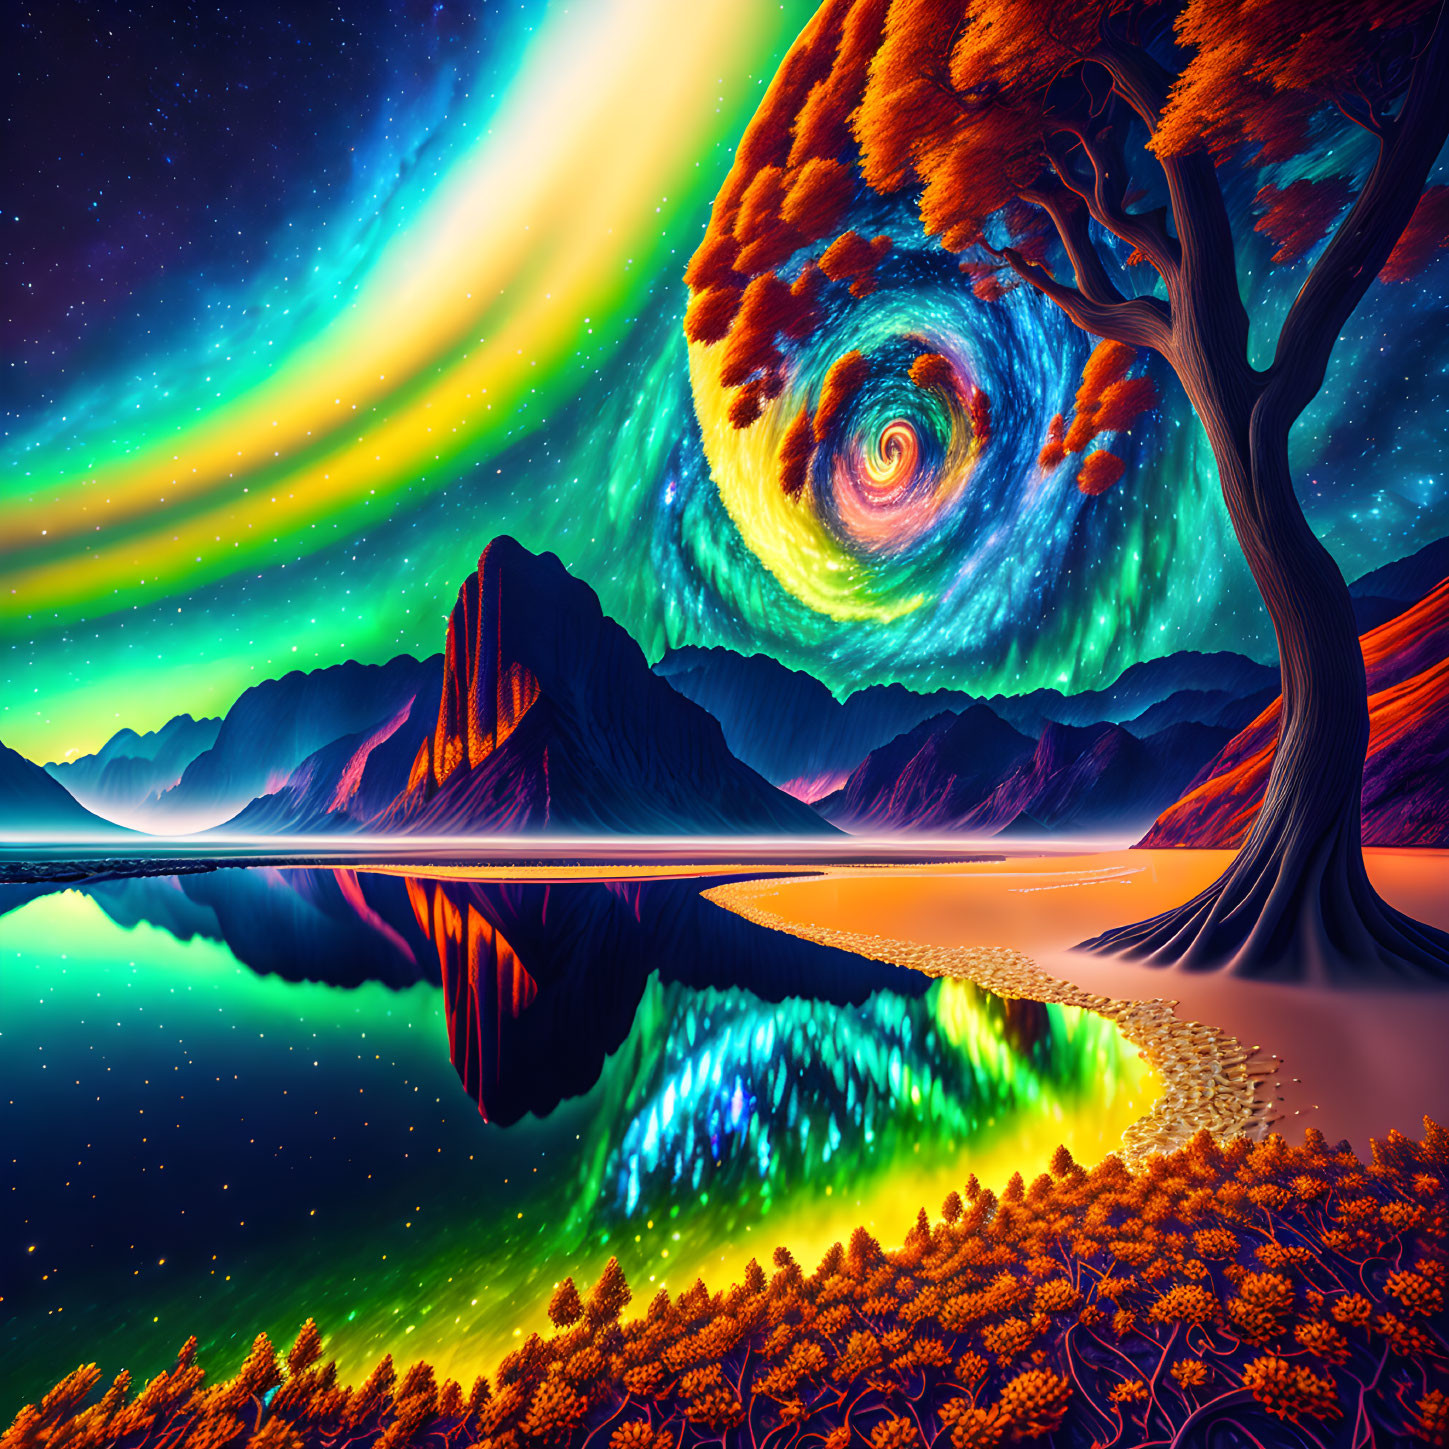 Surreal landscape with swirling sky and colorful flora